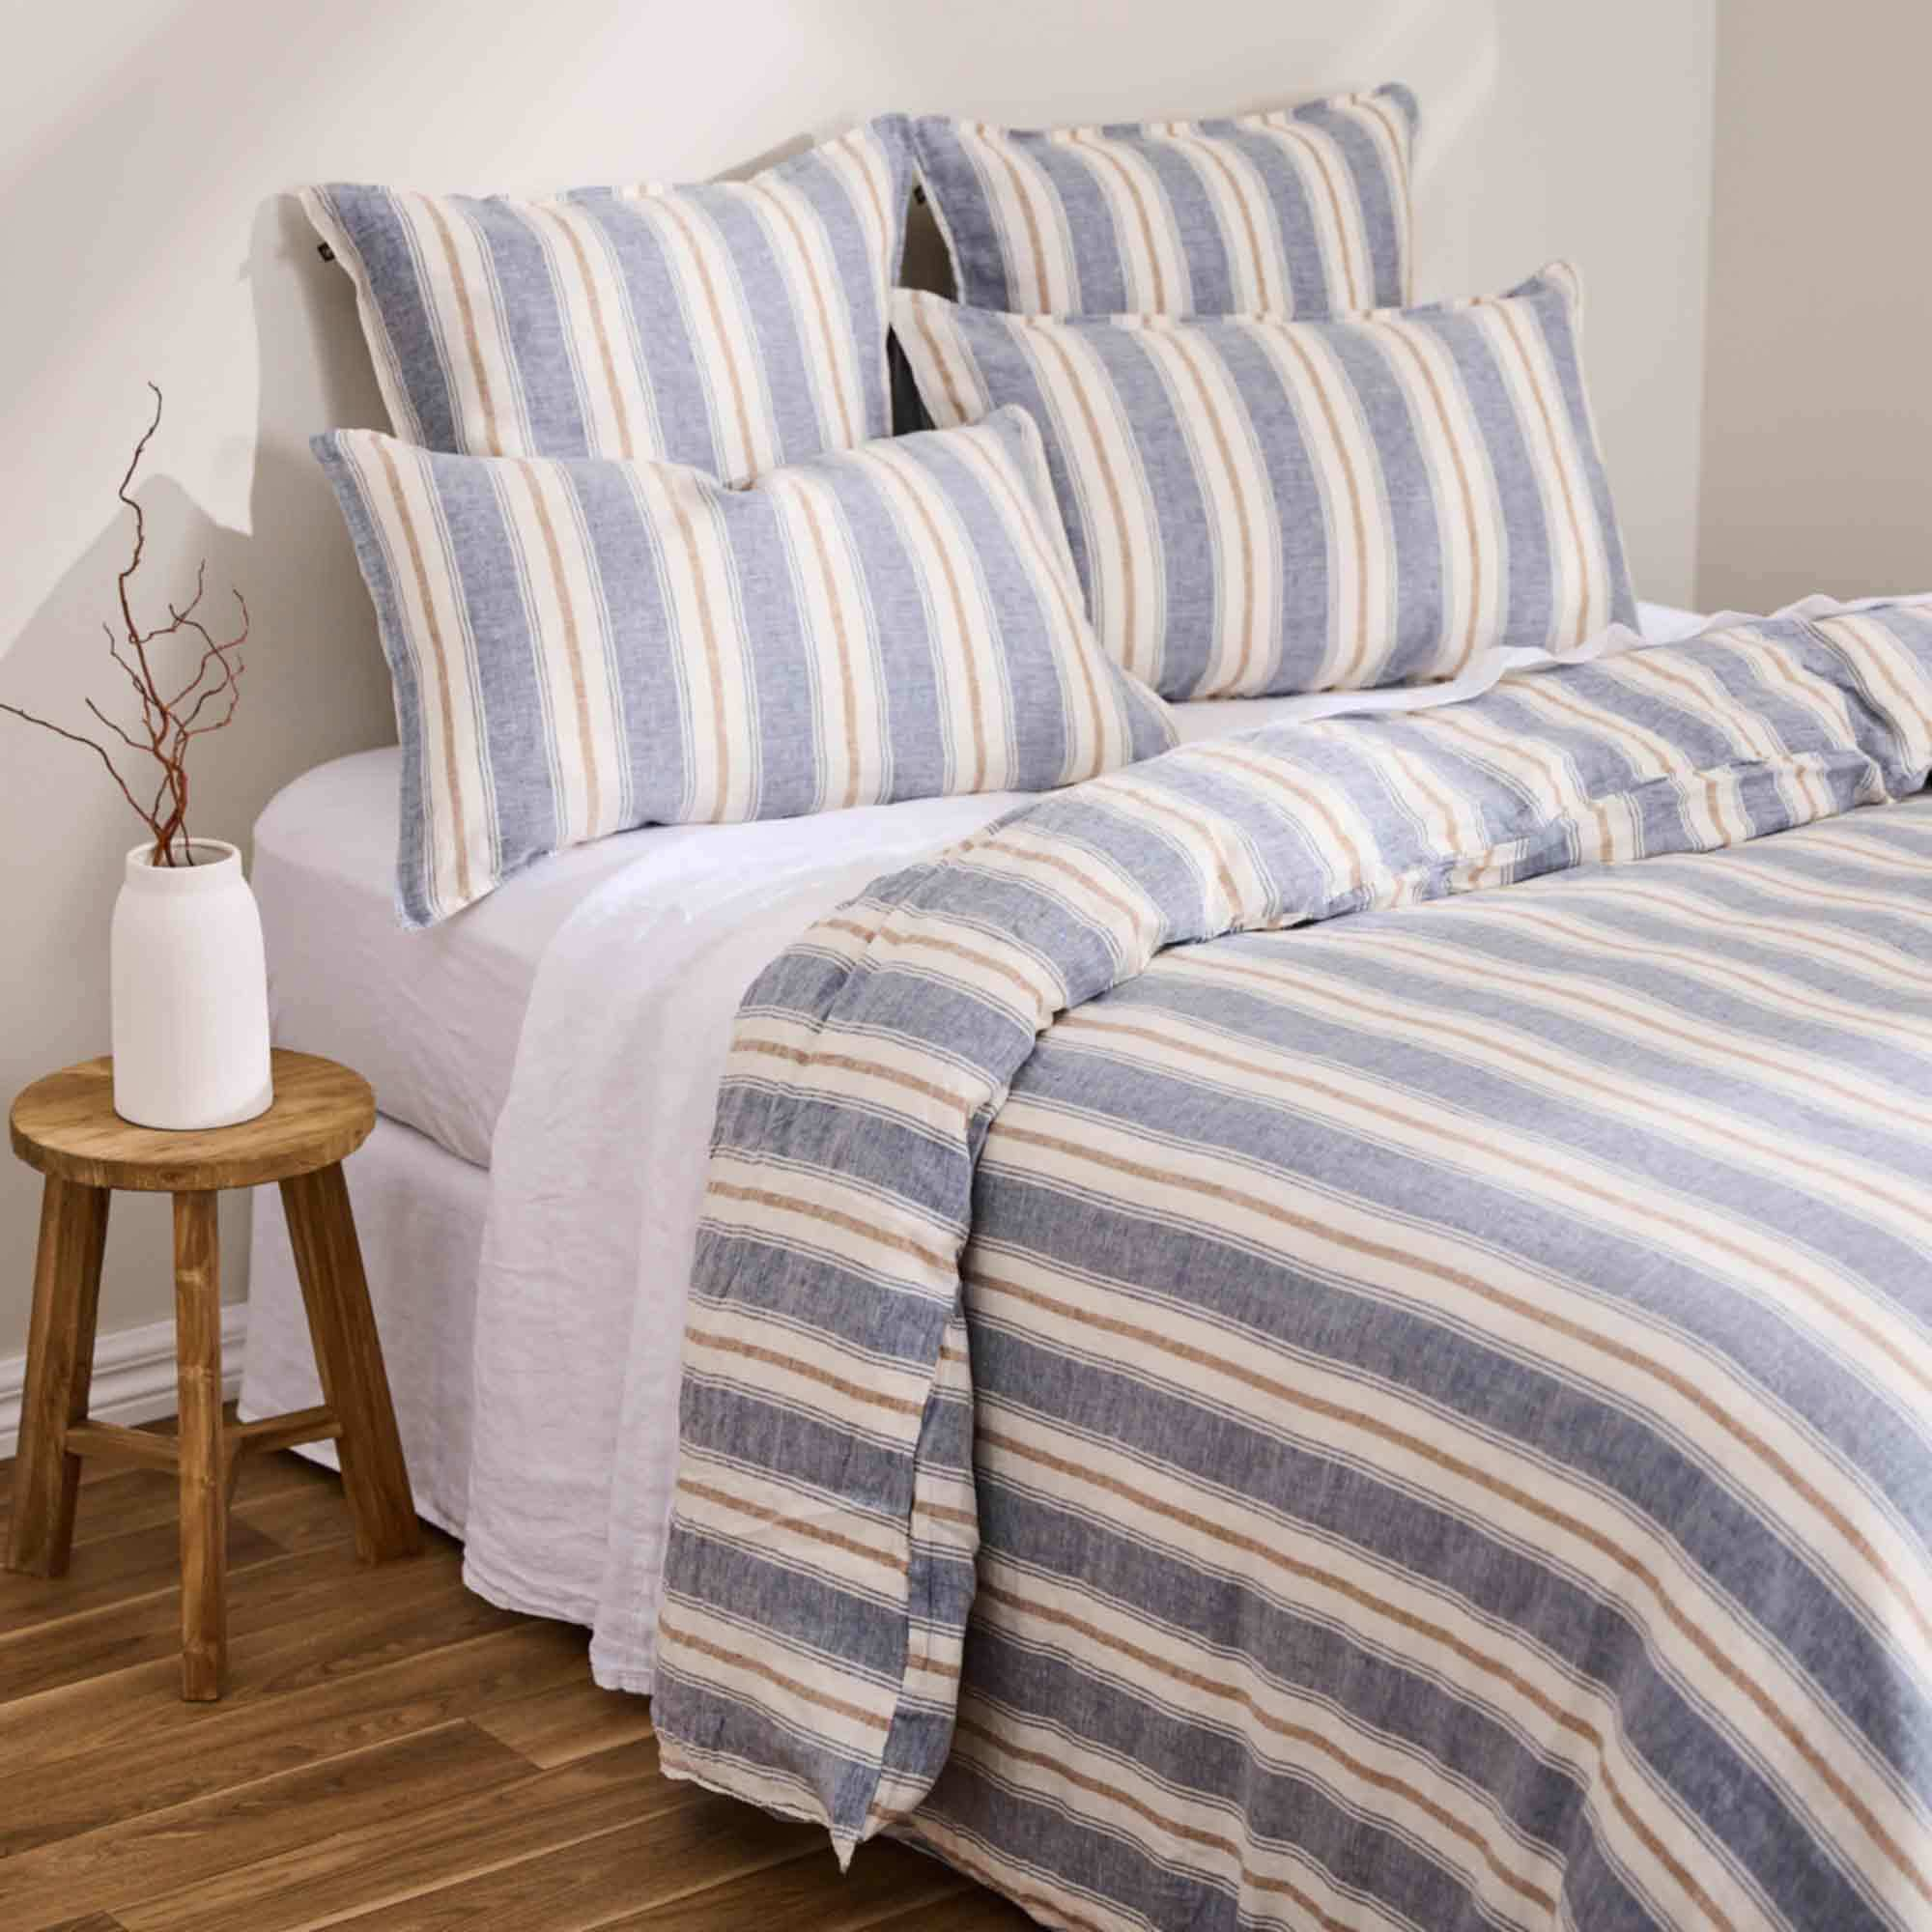 Hotel At Home Linia Stripe French Linen Duvet Cover Set